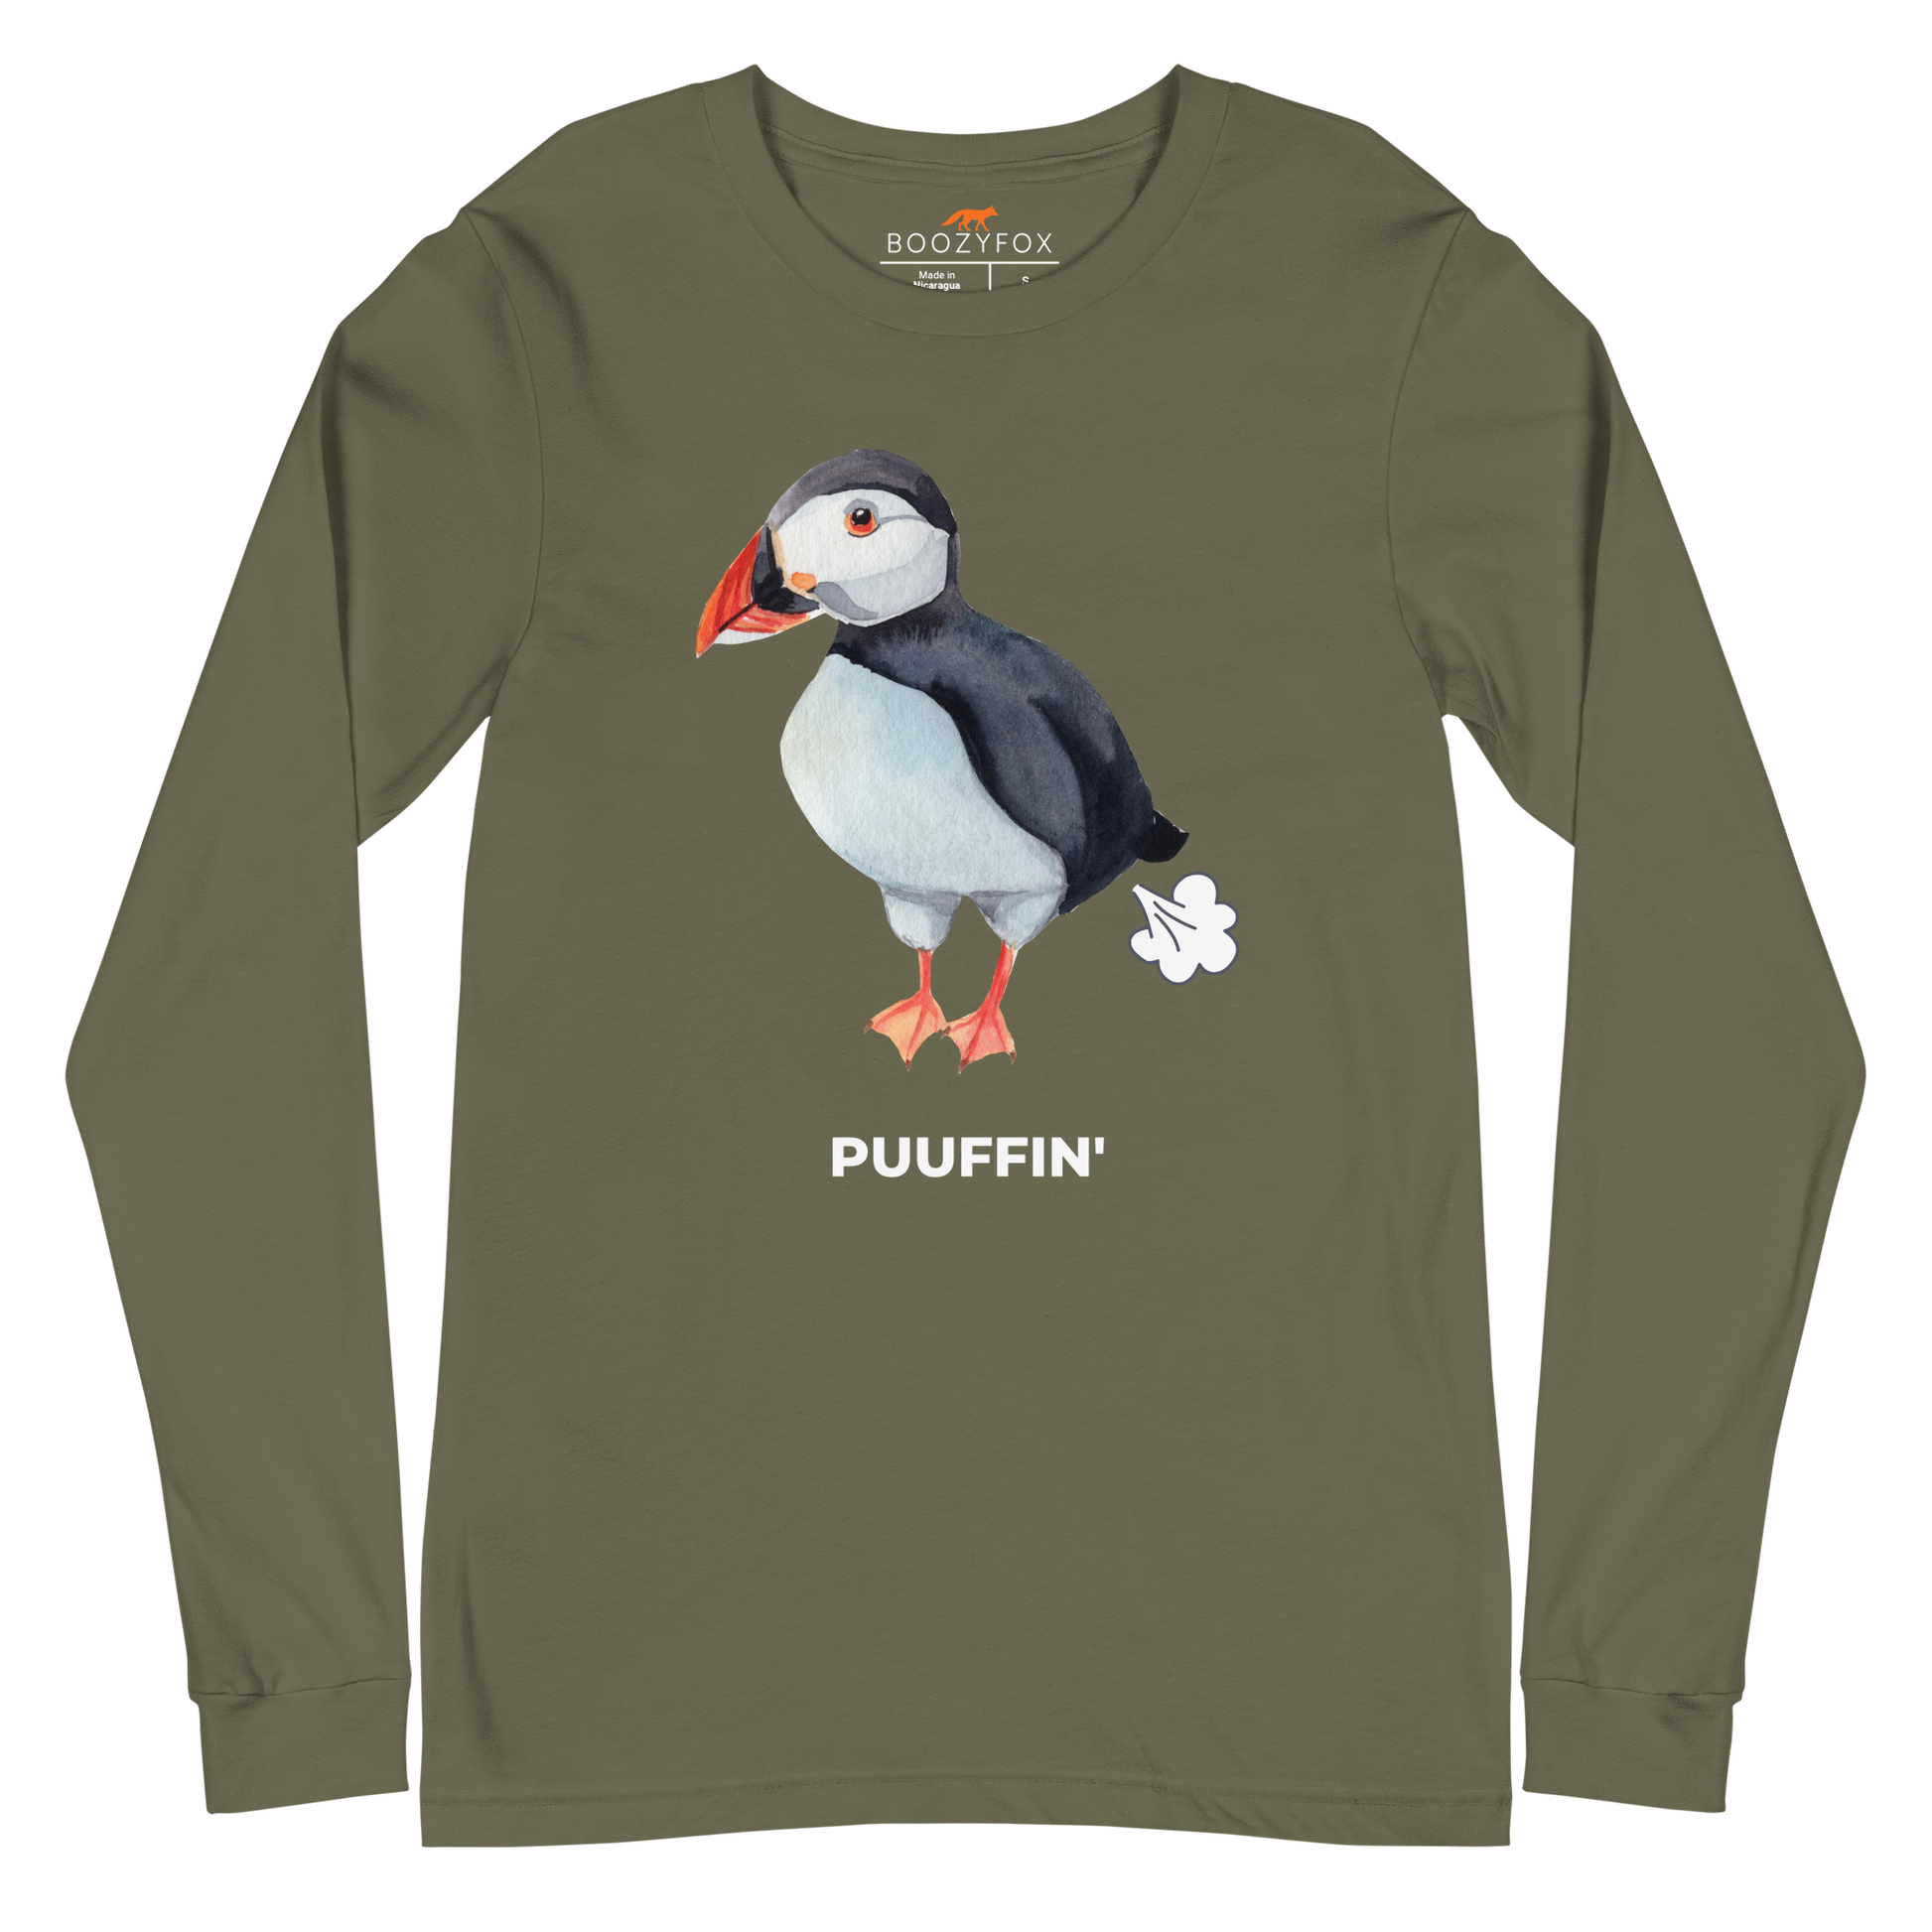 Military Green Puffin Long Sleeve Tee featuring a comic Puuffin' graphic on the chest - Funny Puffin Long Sleeve Graphic Tees - Boozy Fox